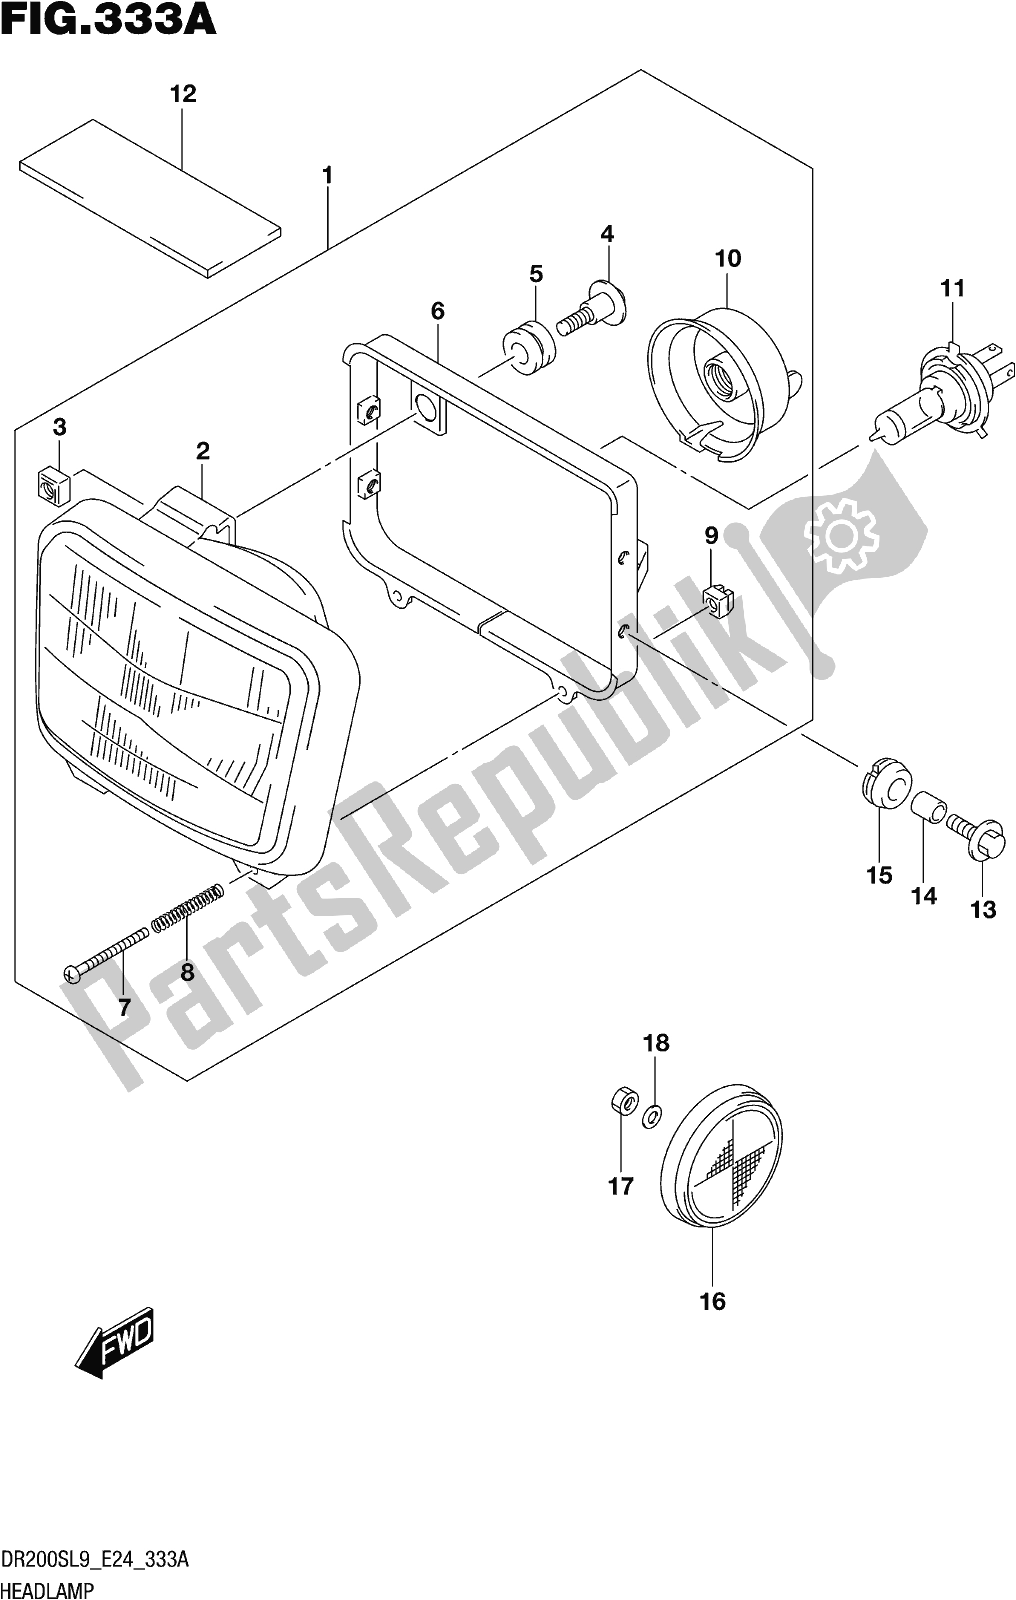 All parts for the Fig. 333a Headlamp of the Suzuki DR 200S 2019